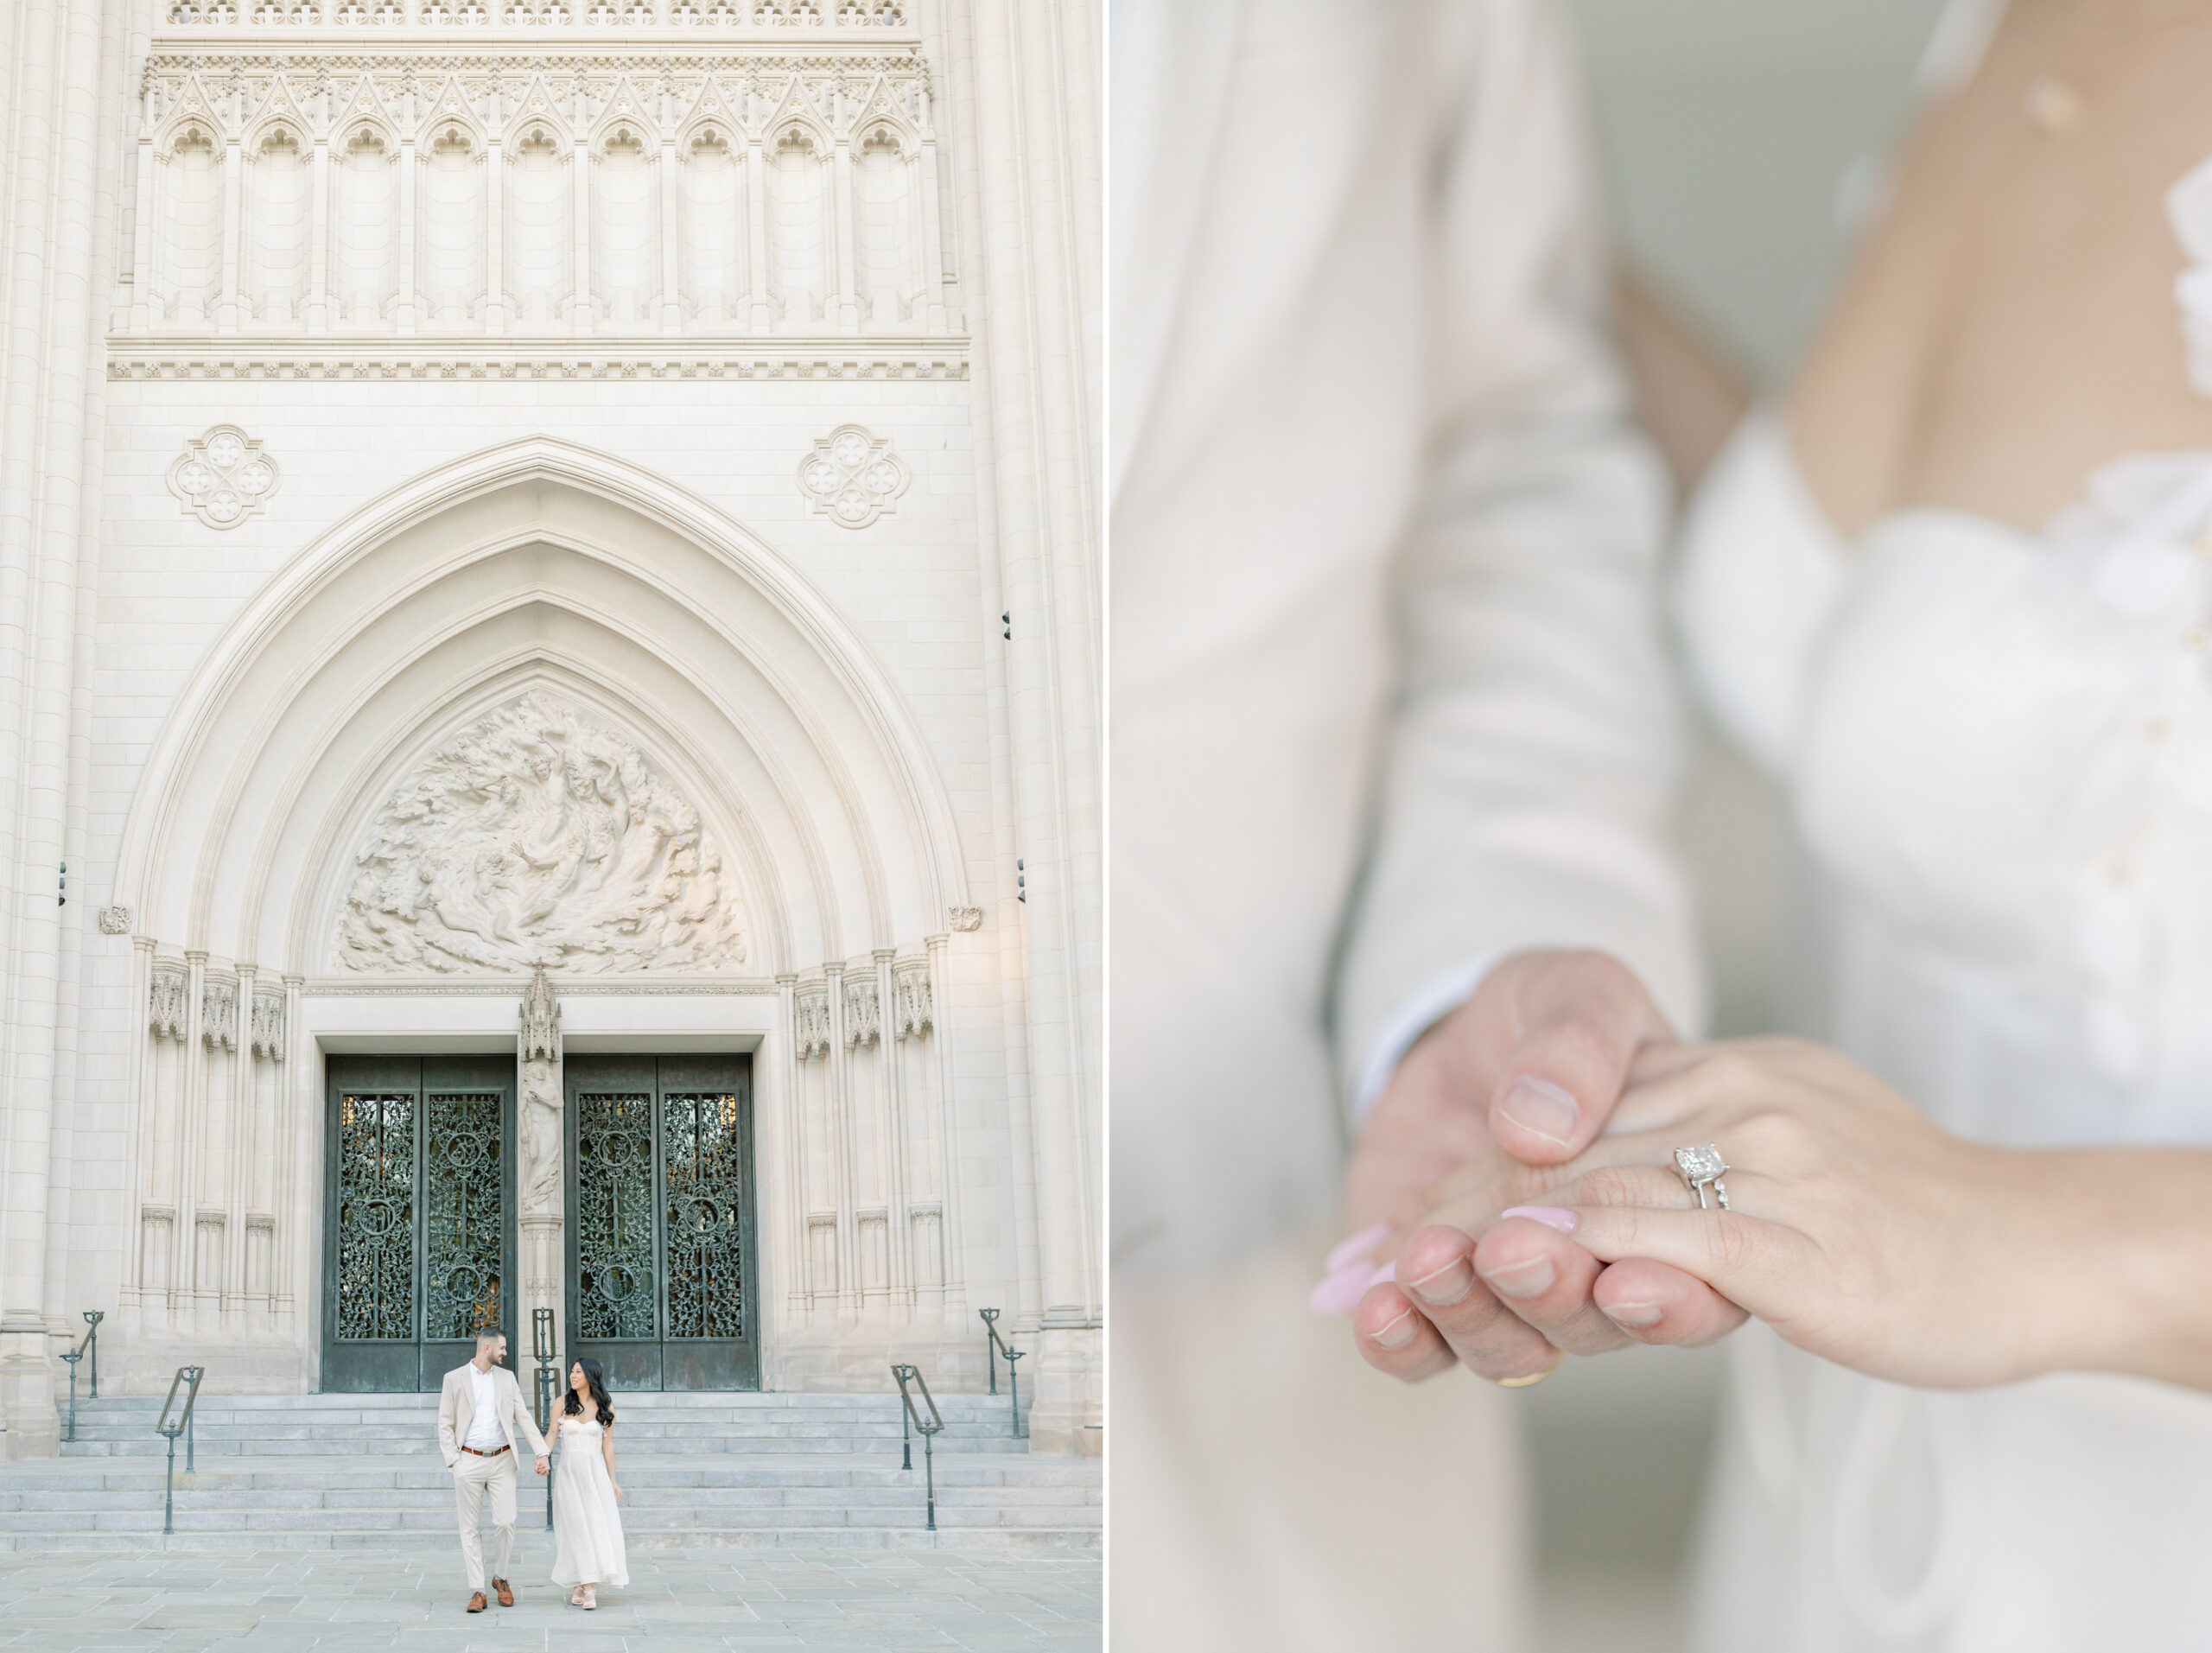 A stunning set of wedding anniversary portraits captured at the National Cathedral in Washington, DC.